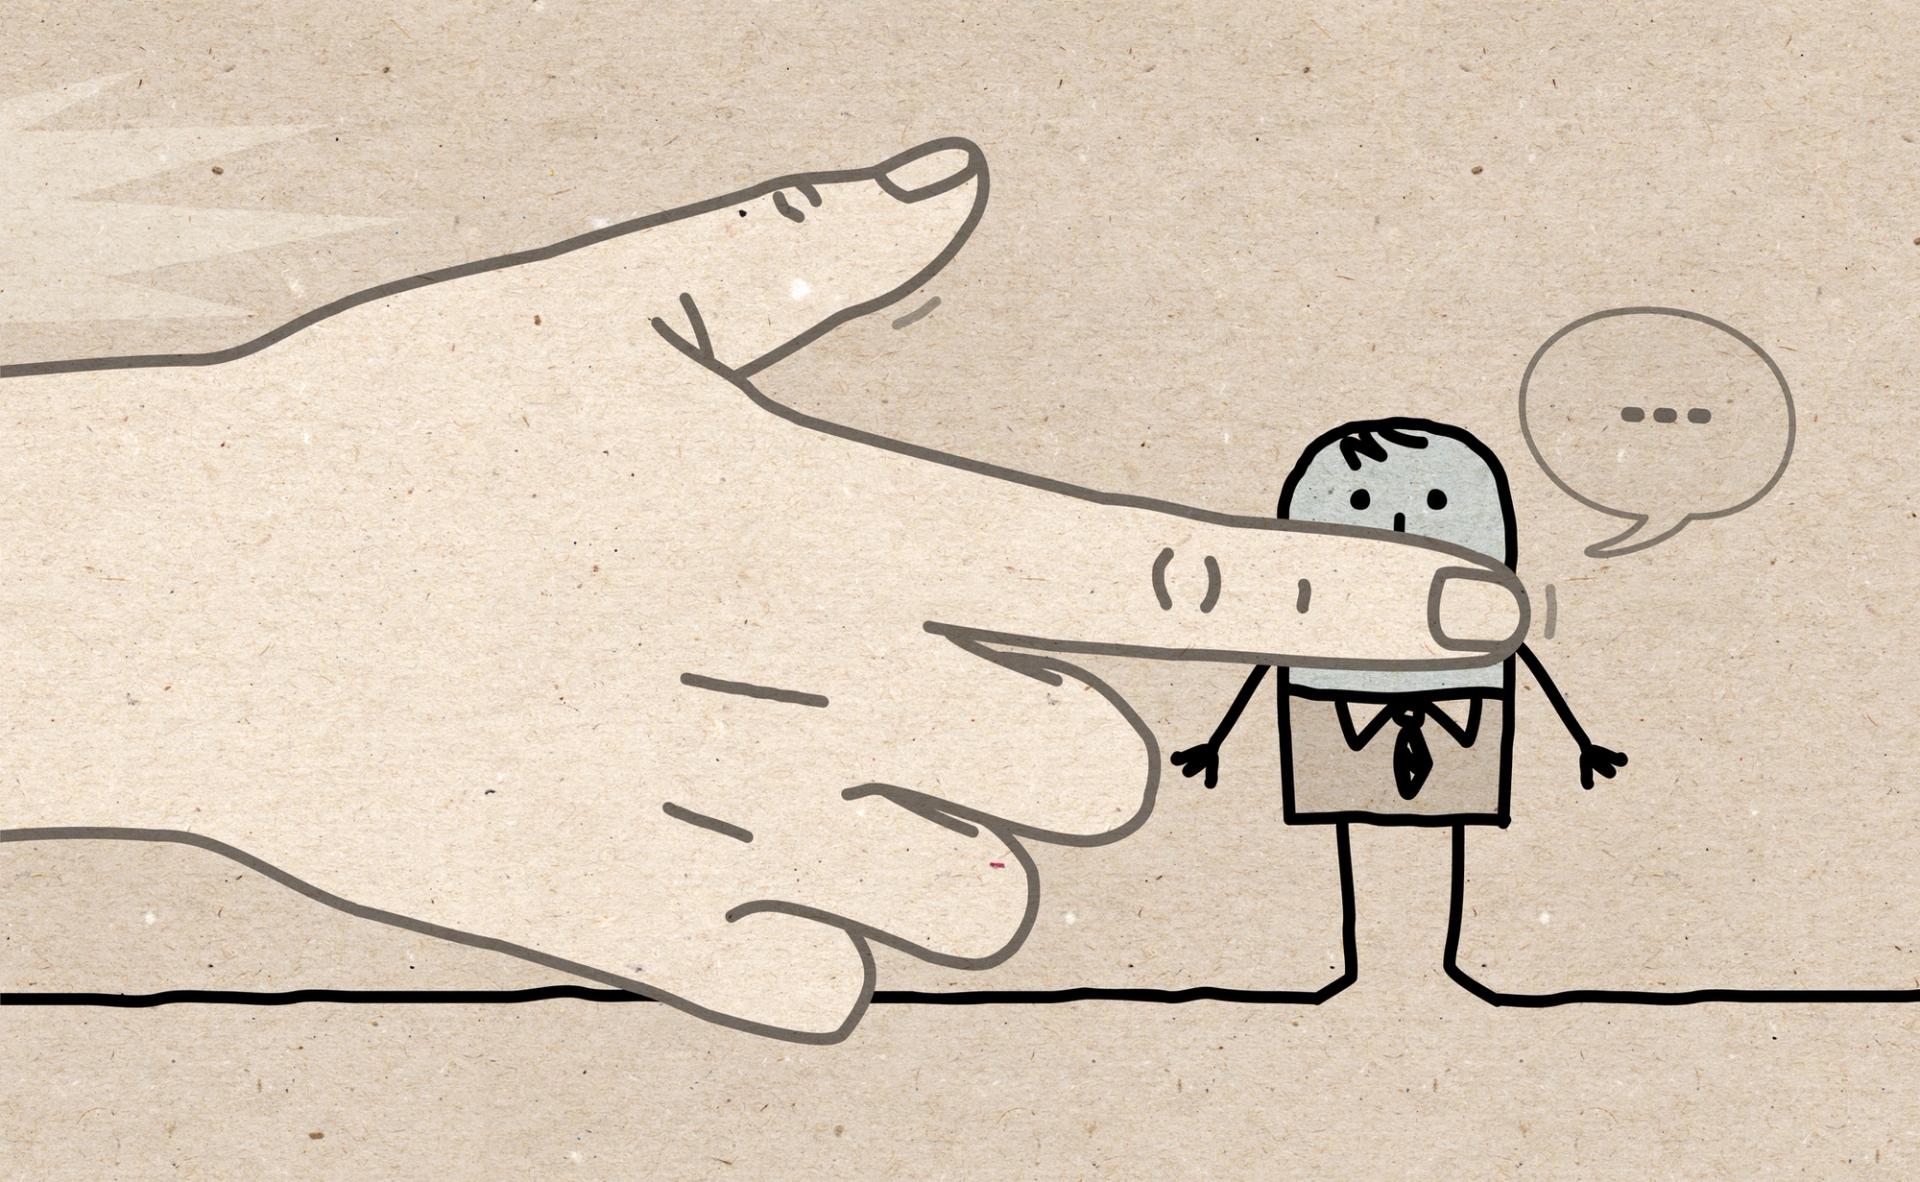 A cartoon line drawing of a small man. A large hand, bigger than the man, reaches out an index finger and places it across his mouth to silence him.